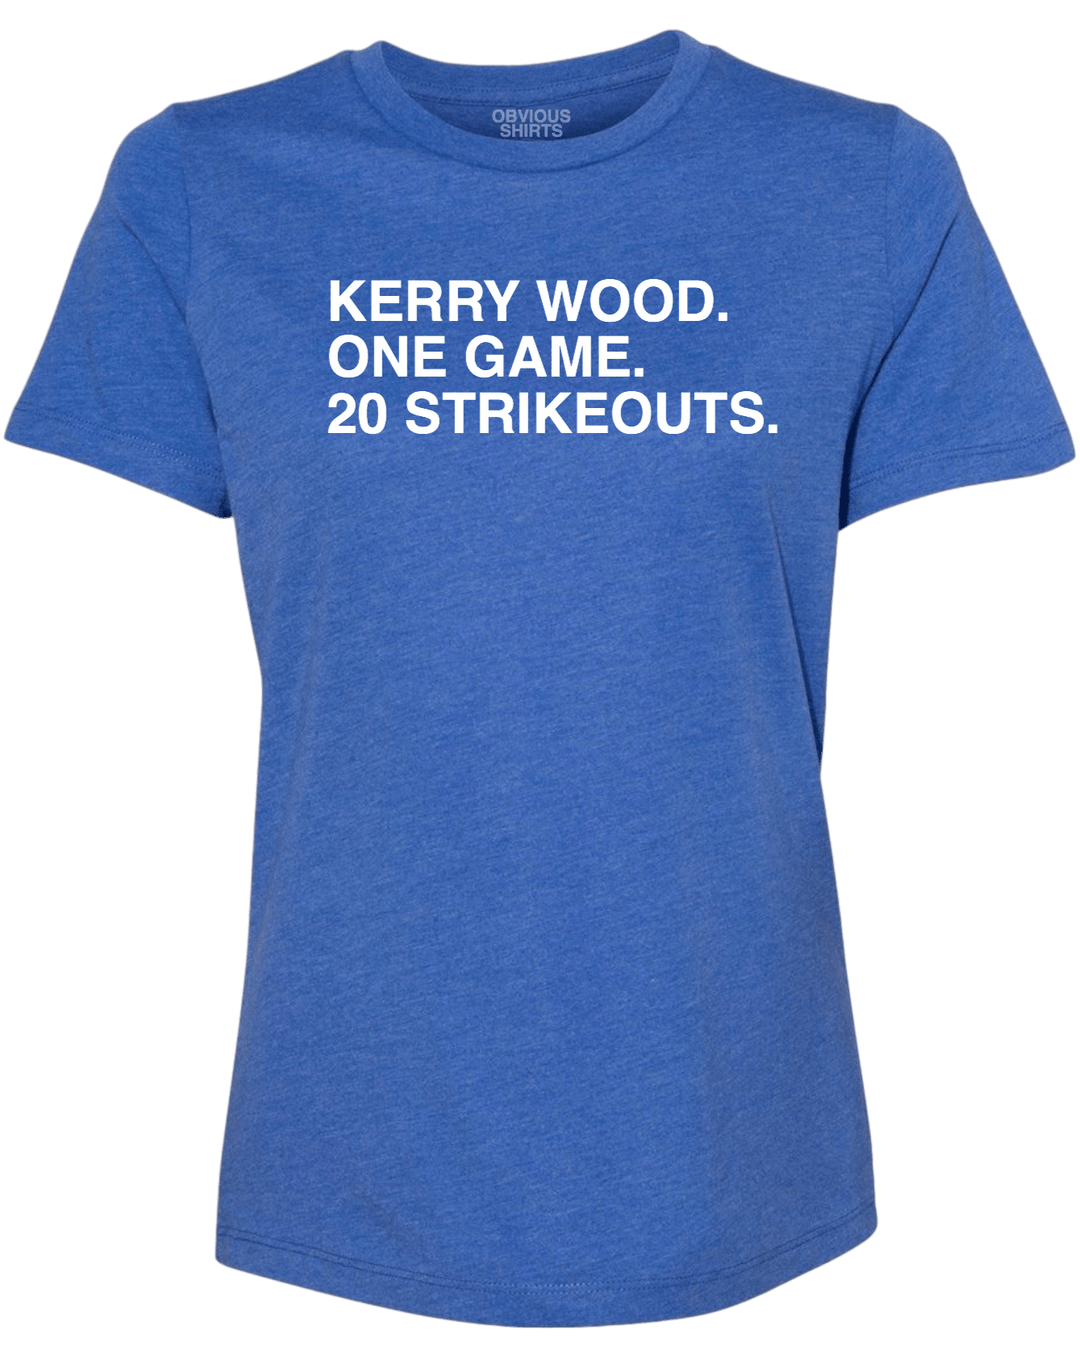 KERRY WOOD. ONE GAME. 20 STRIKEOUTS. (WOMEN'S CREW) - OBVIOUS SHIRTS.